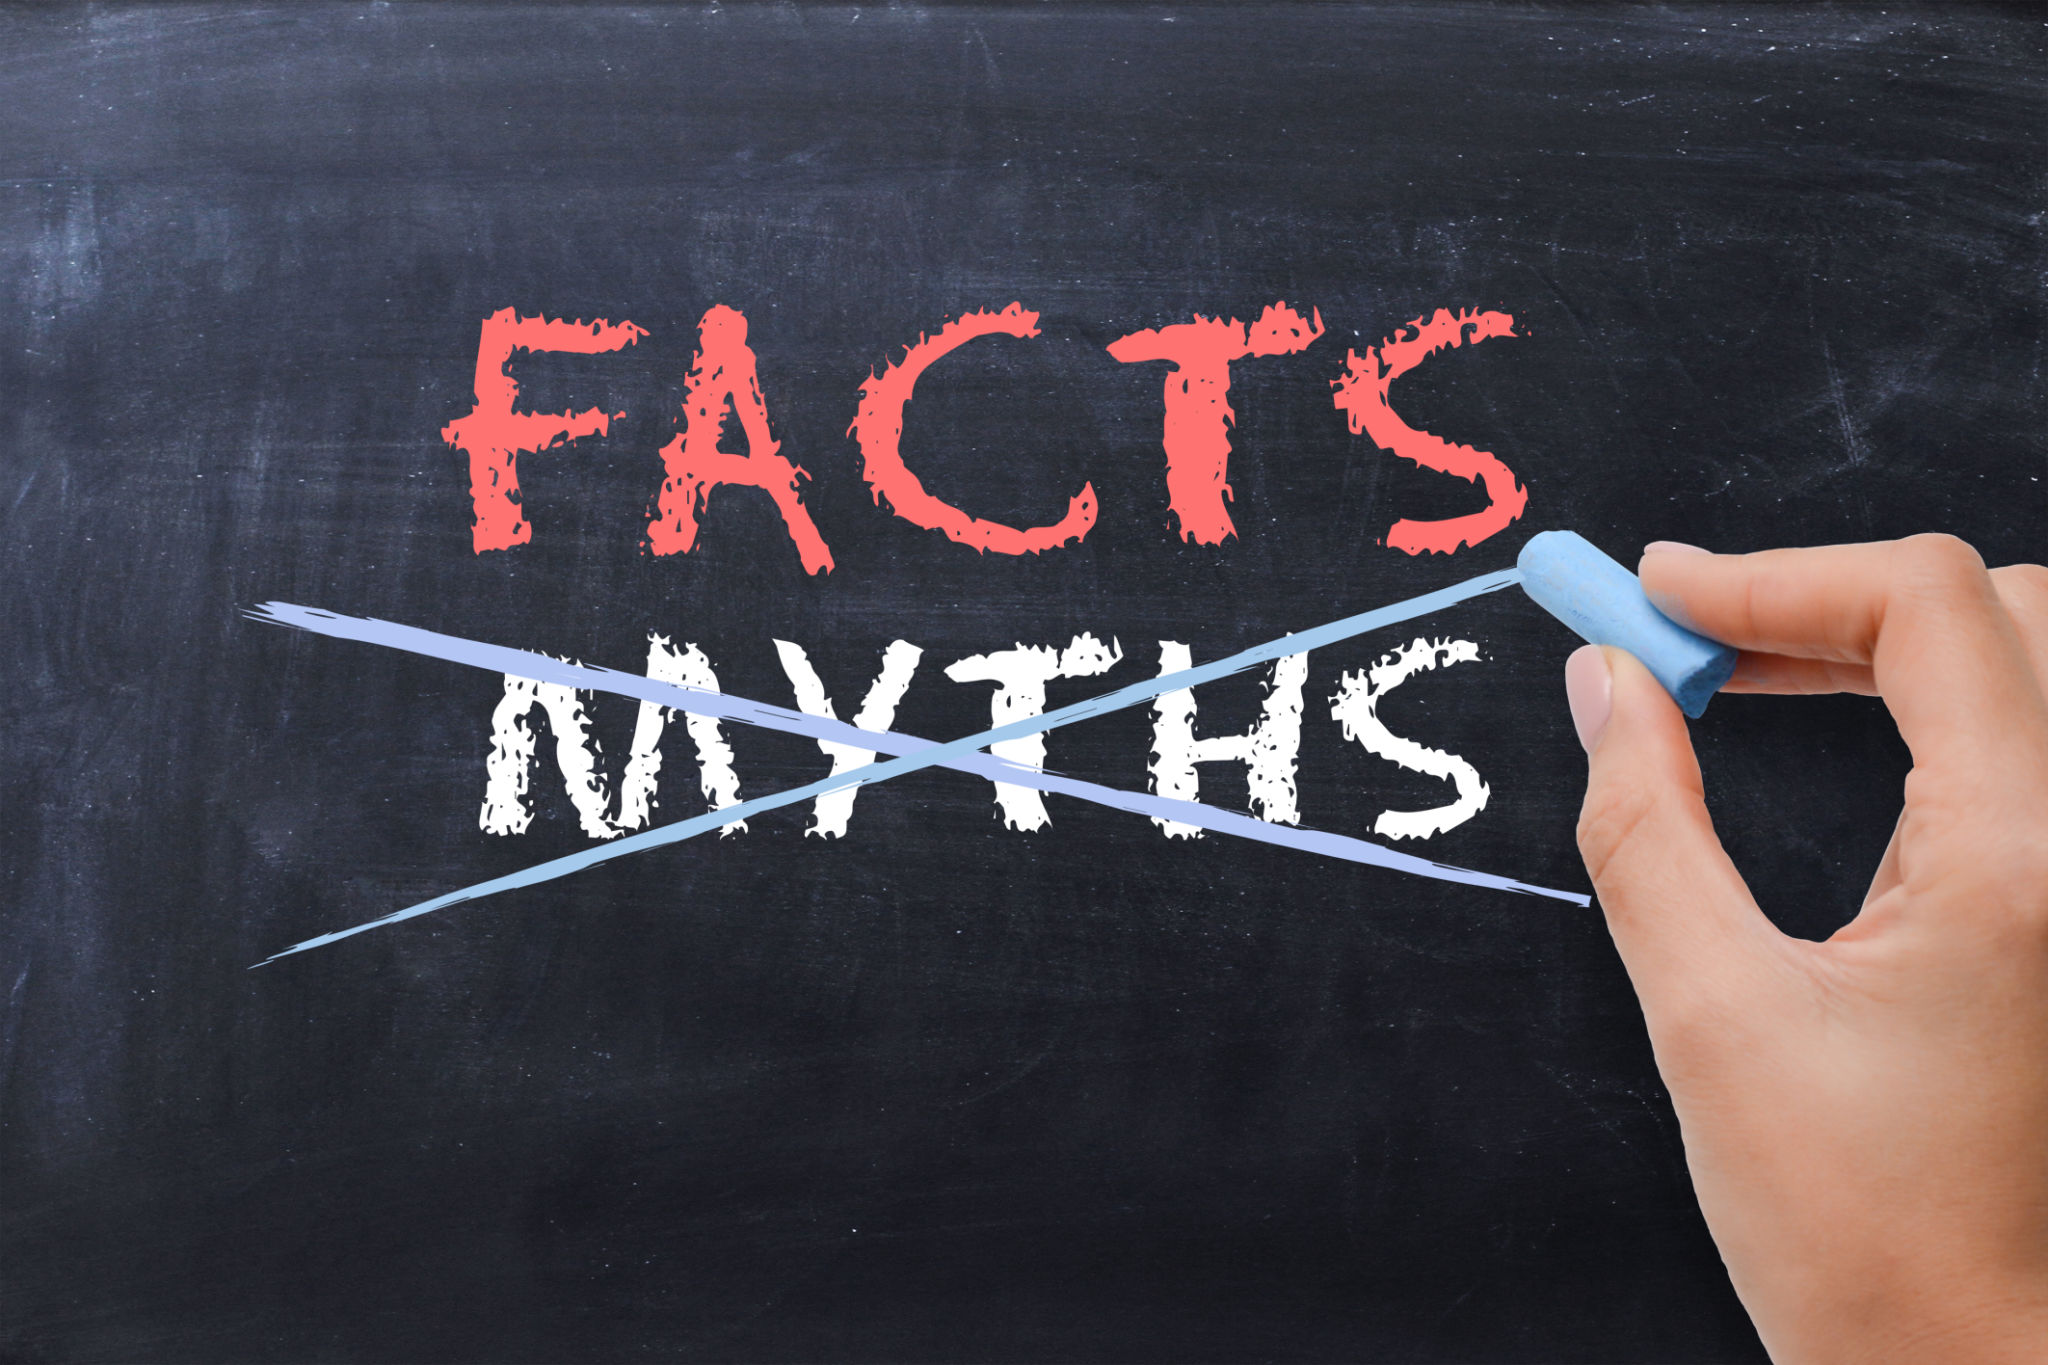 Franchising Path | 5 Common Franchise Myths Dispelled